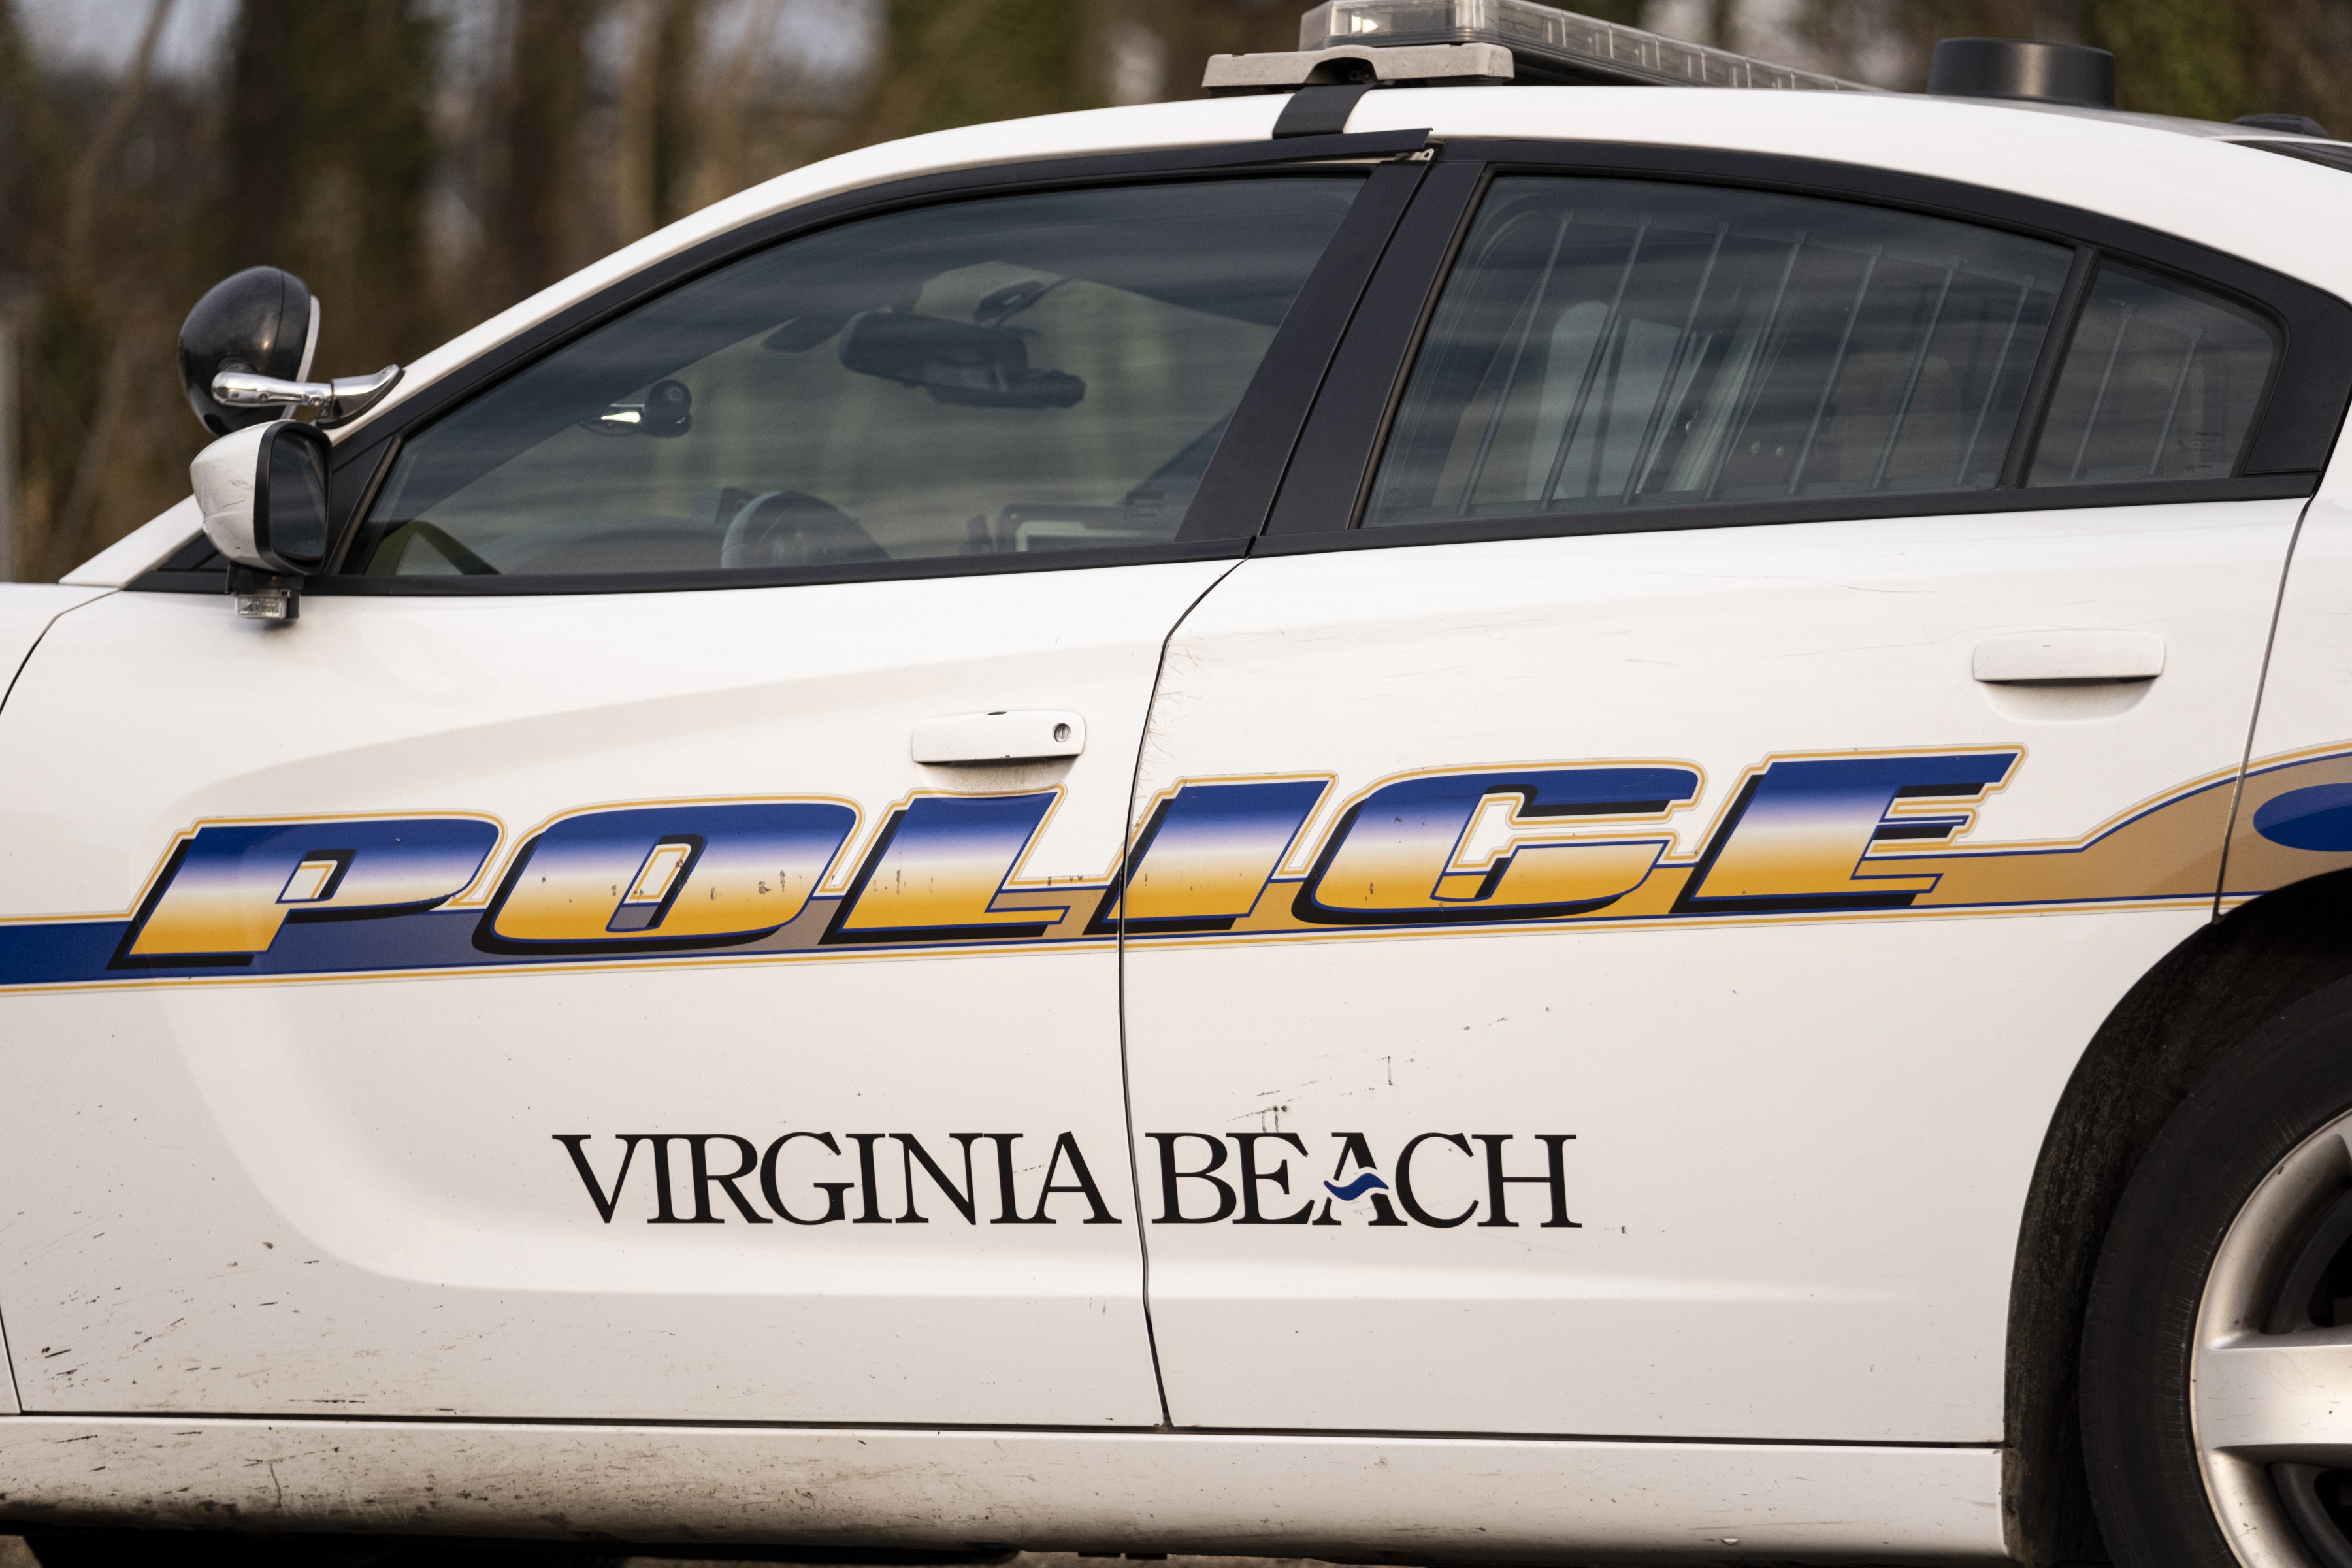 Man injured after shooting outside Virginia Beach church after Palm